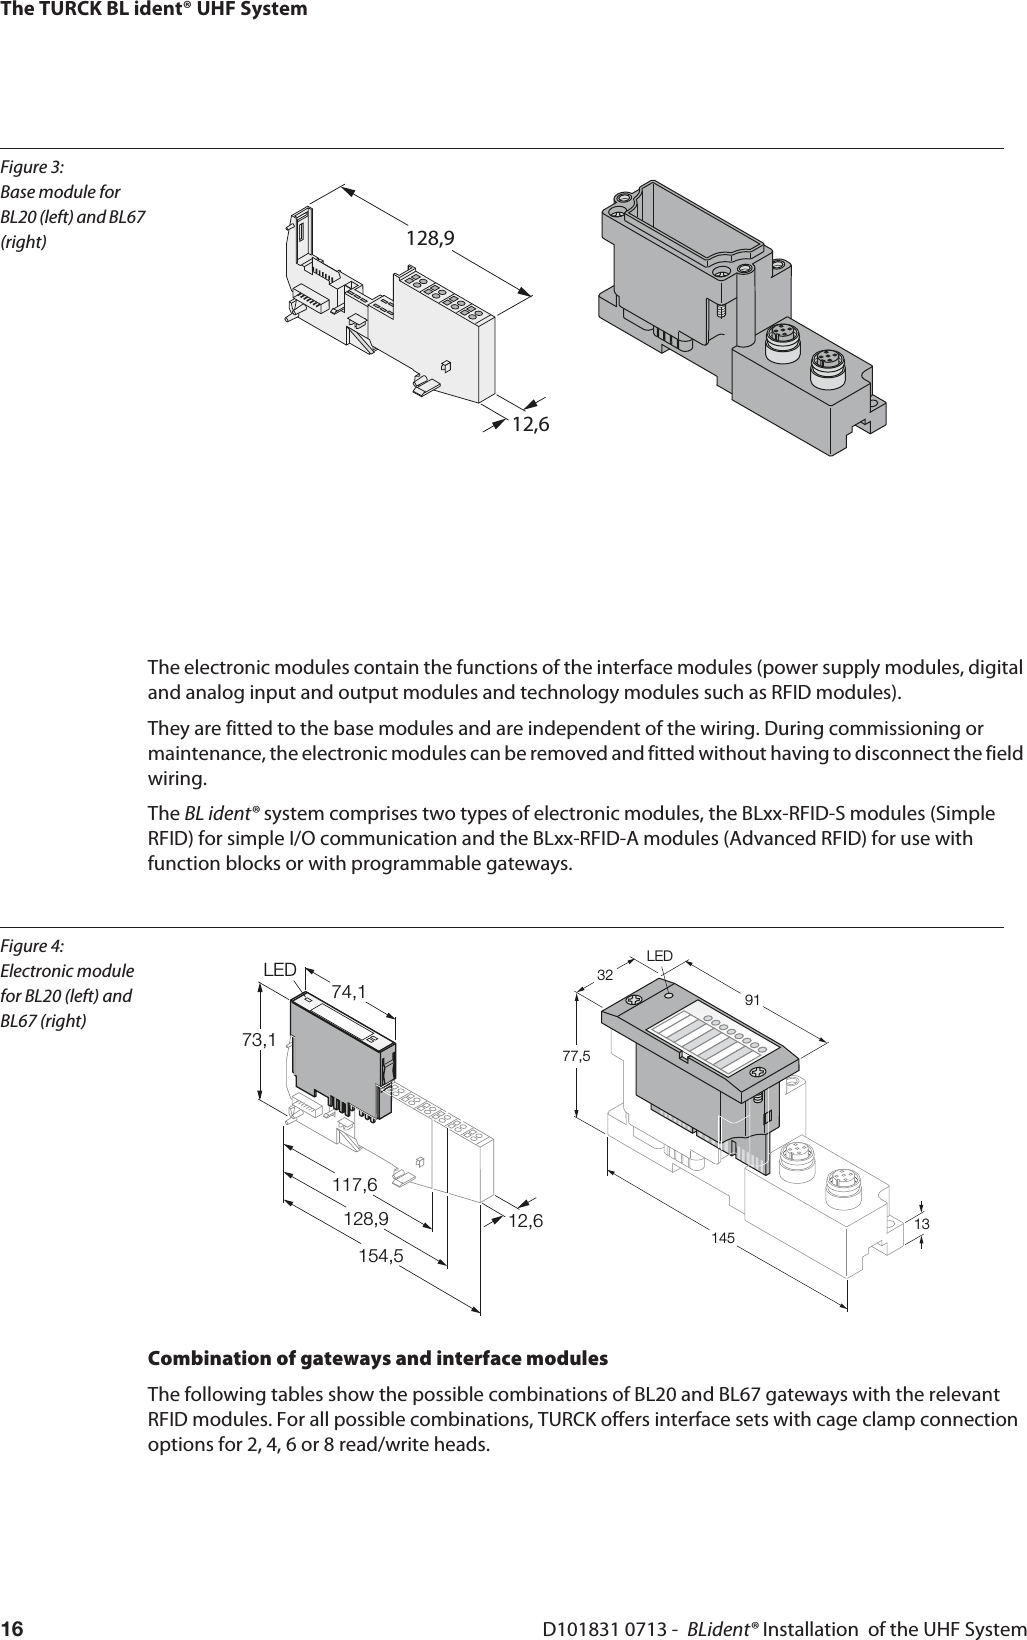 Figure 3: Base module for BL20 (left) and BL67 (right)128,912,6The TURCK BL ident® UHF SystemD101831 0713 -  BLident® Installation  of the UHF System16The electronic modules contain the functions of the interface modules (power supply modules, digital and analog input and output modules and technology modules such as RFID modules).They are fitted to the base modules and are independent of the wiring. During commissioning or maintenance, the electronic modules can be removed and fitted without having to disconnect the field wiring.The BL ident® system comprises two types of electronic modules, the BLxx-RFID-S modules (Simple RFID) for simple I/O communication and the BLxx-RFID-A modules (Advanced RFID) for use with function blocks or with programmable gateways.Figure 4: Electronic module for BL20 (left) and BL67 (right)154,512,674,1LED128,9117,673,1LED913277,513145Combination of gateways and interface modulesThe following tables show the possible combinations of BL20 and BL67 gateways with the relevant RFID modules. For all possible combinations, TURCK offers interface sets with cage clamp connection options for 2, 4, 6 or 8 read/write heads.